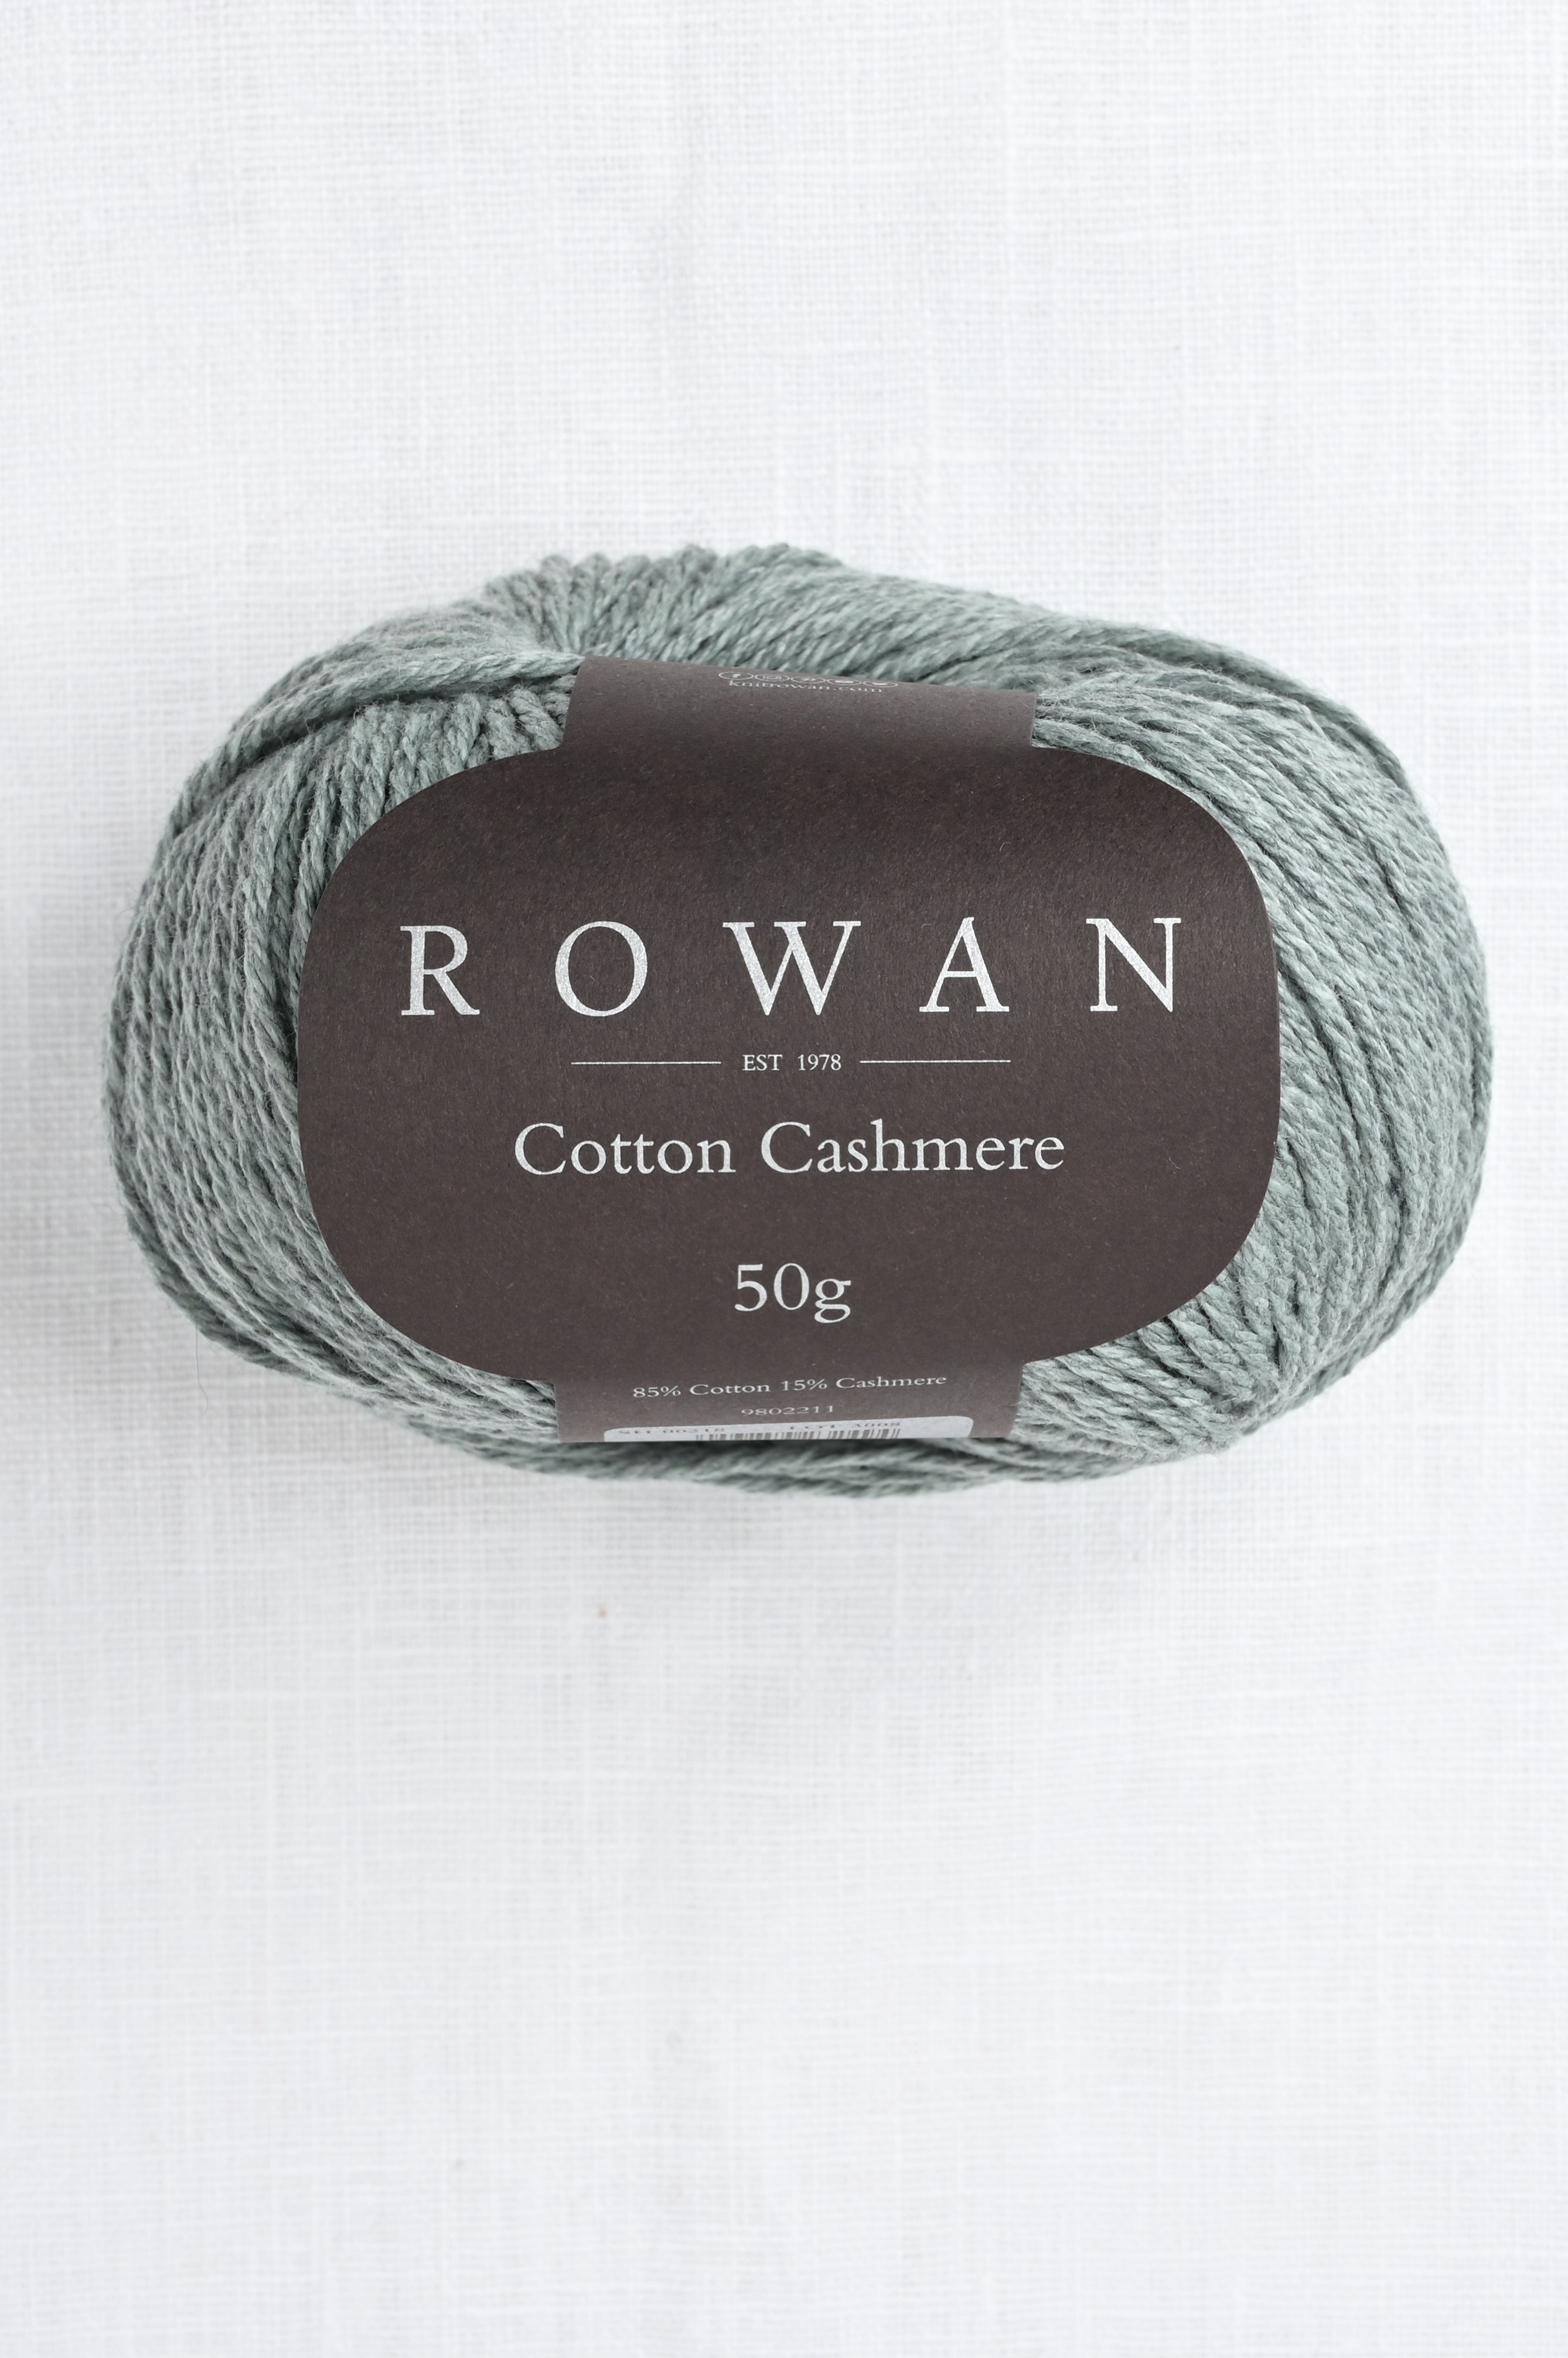 Rowan Cotton Cashmere Yarn - The Websters